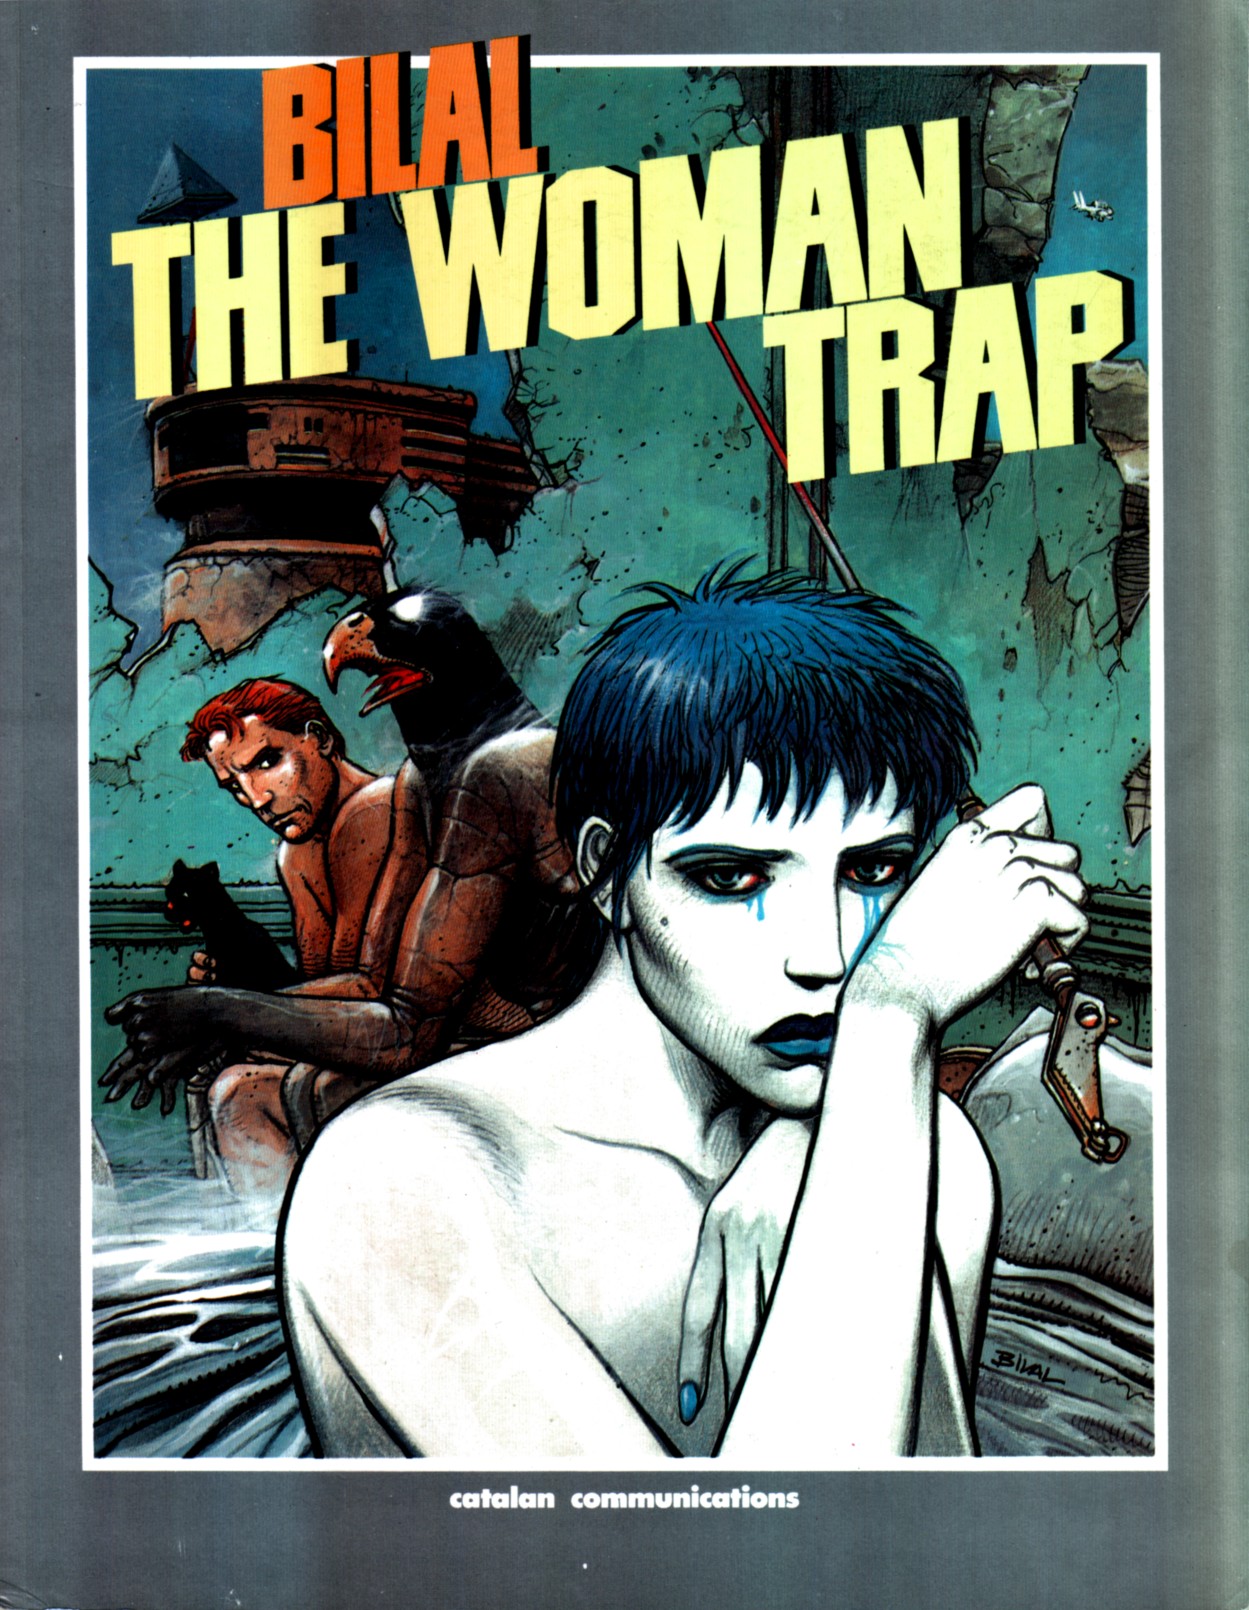 Read online The Woman Trap comic -  Issue # Full - 1